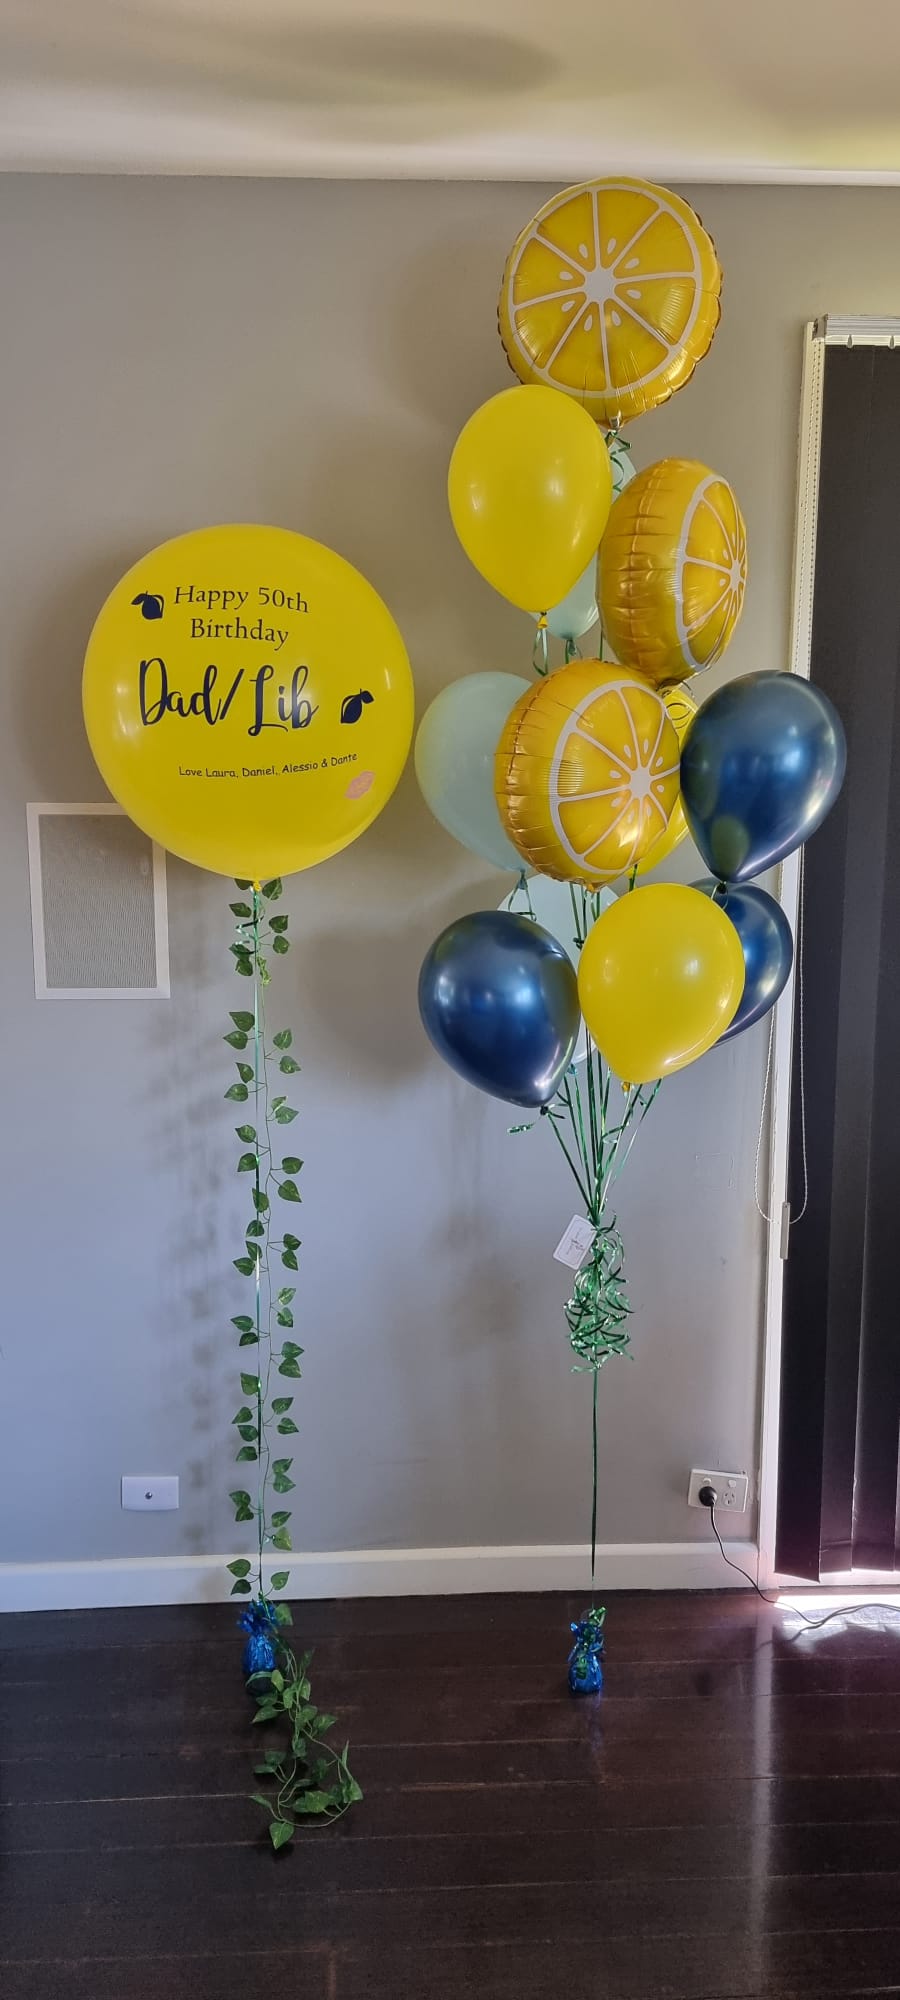 Amalfi coast themed balloon bouquet Melbourne delivered